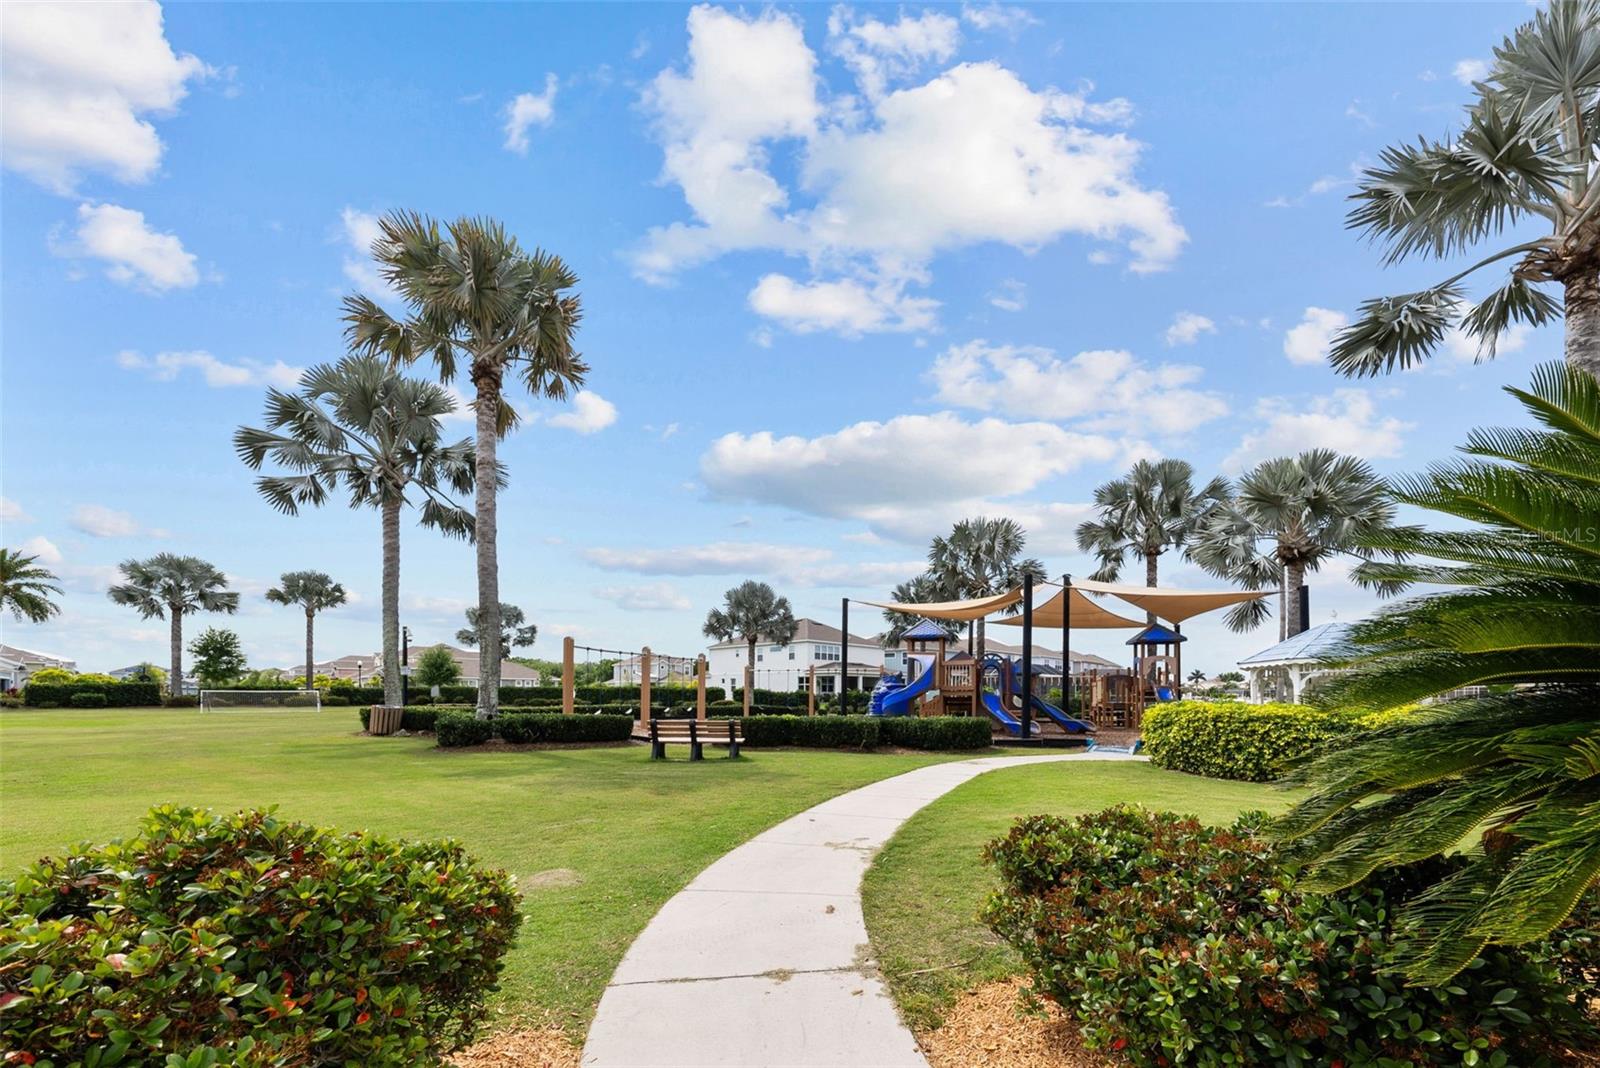 The gorgeous Mirabay Clubhouse contains Fitness Center, Grill, Lap Pool and Activity Pool with iconic Lighthouse slide, kayaks and paddleboards for use on lagoon.